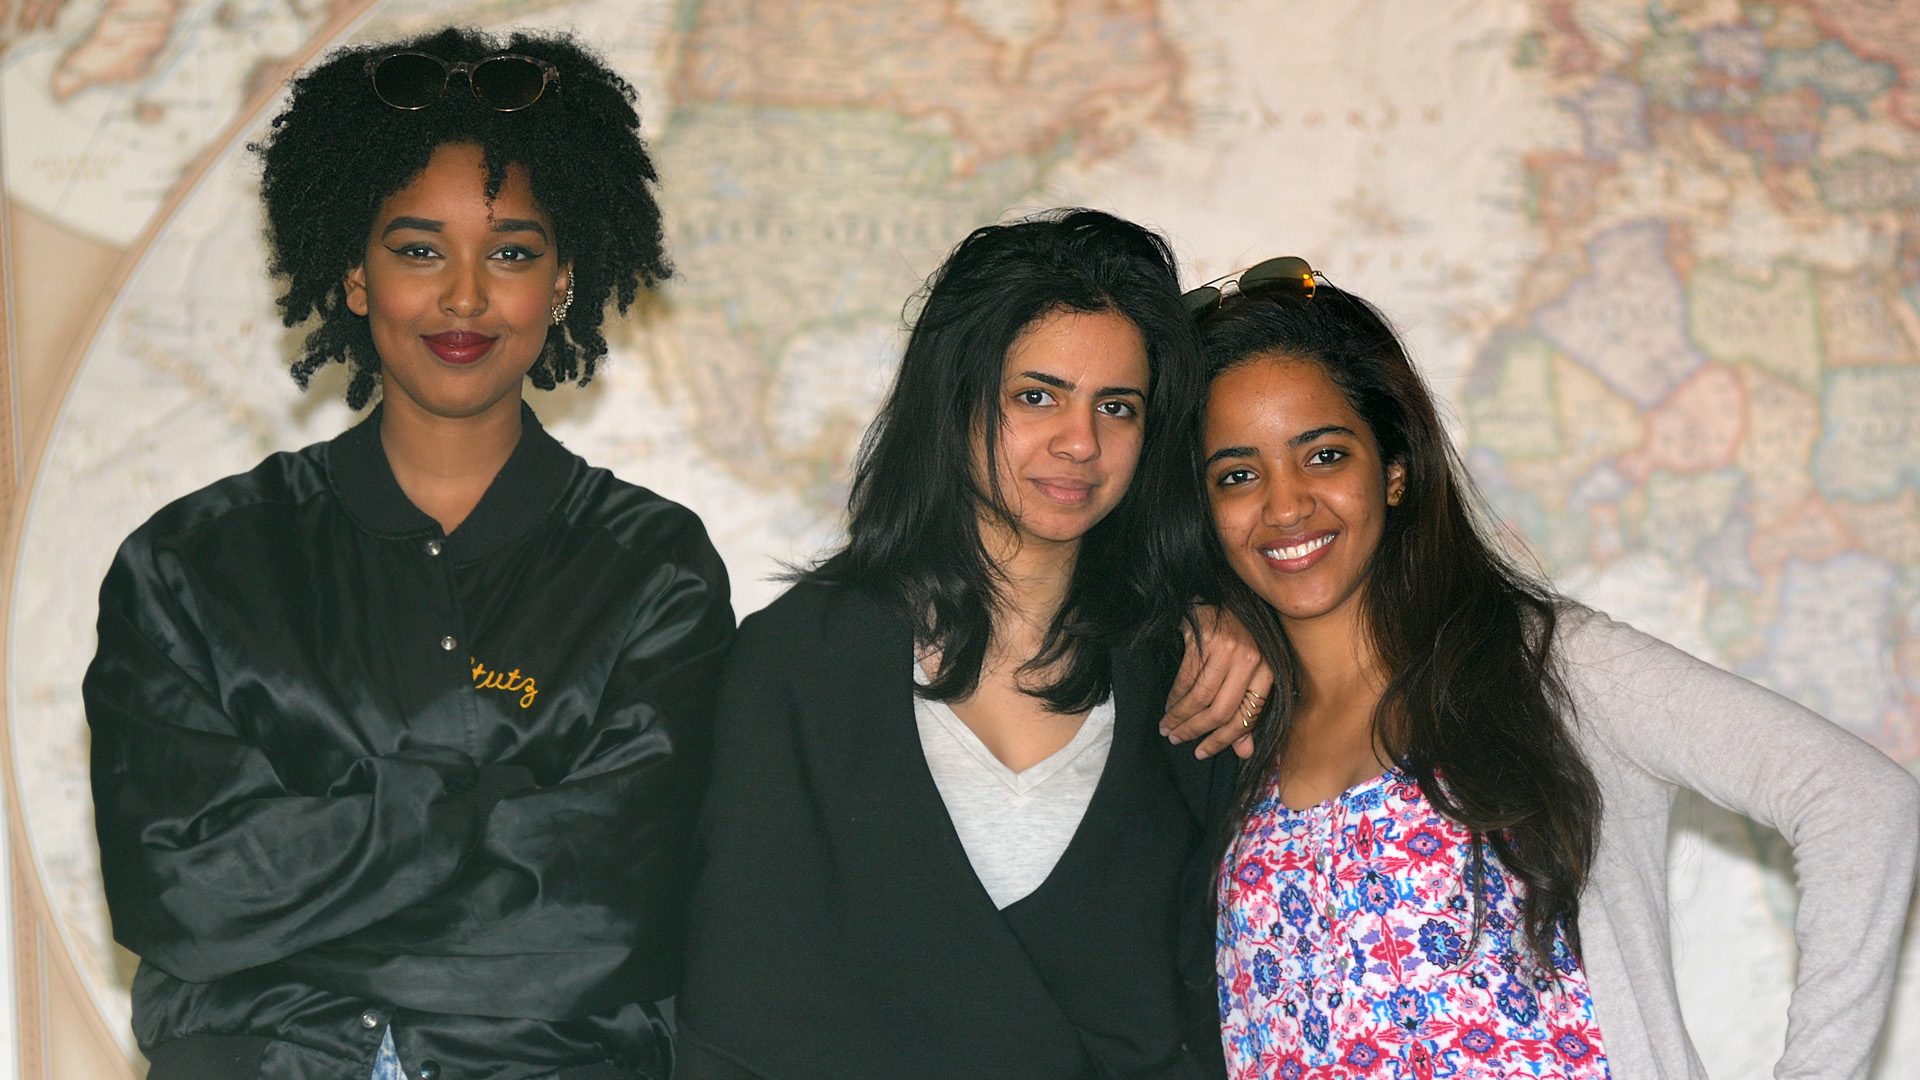 Hana, Shahad & Aisha stand in front of a large world map